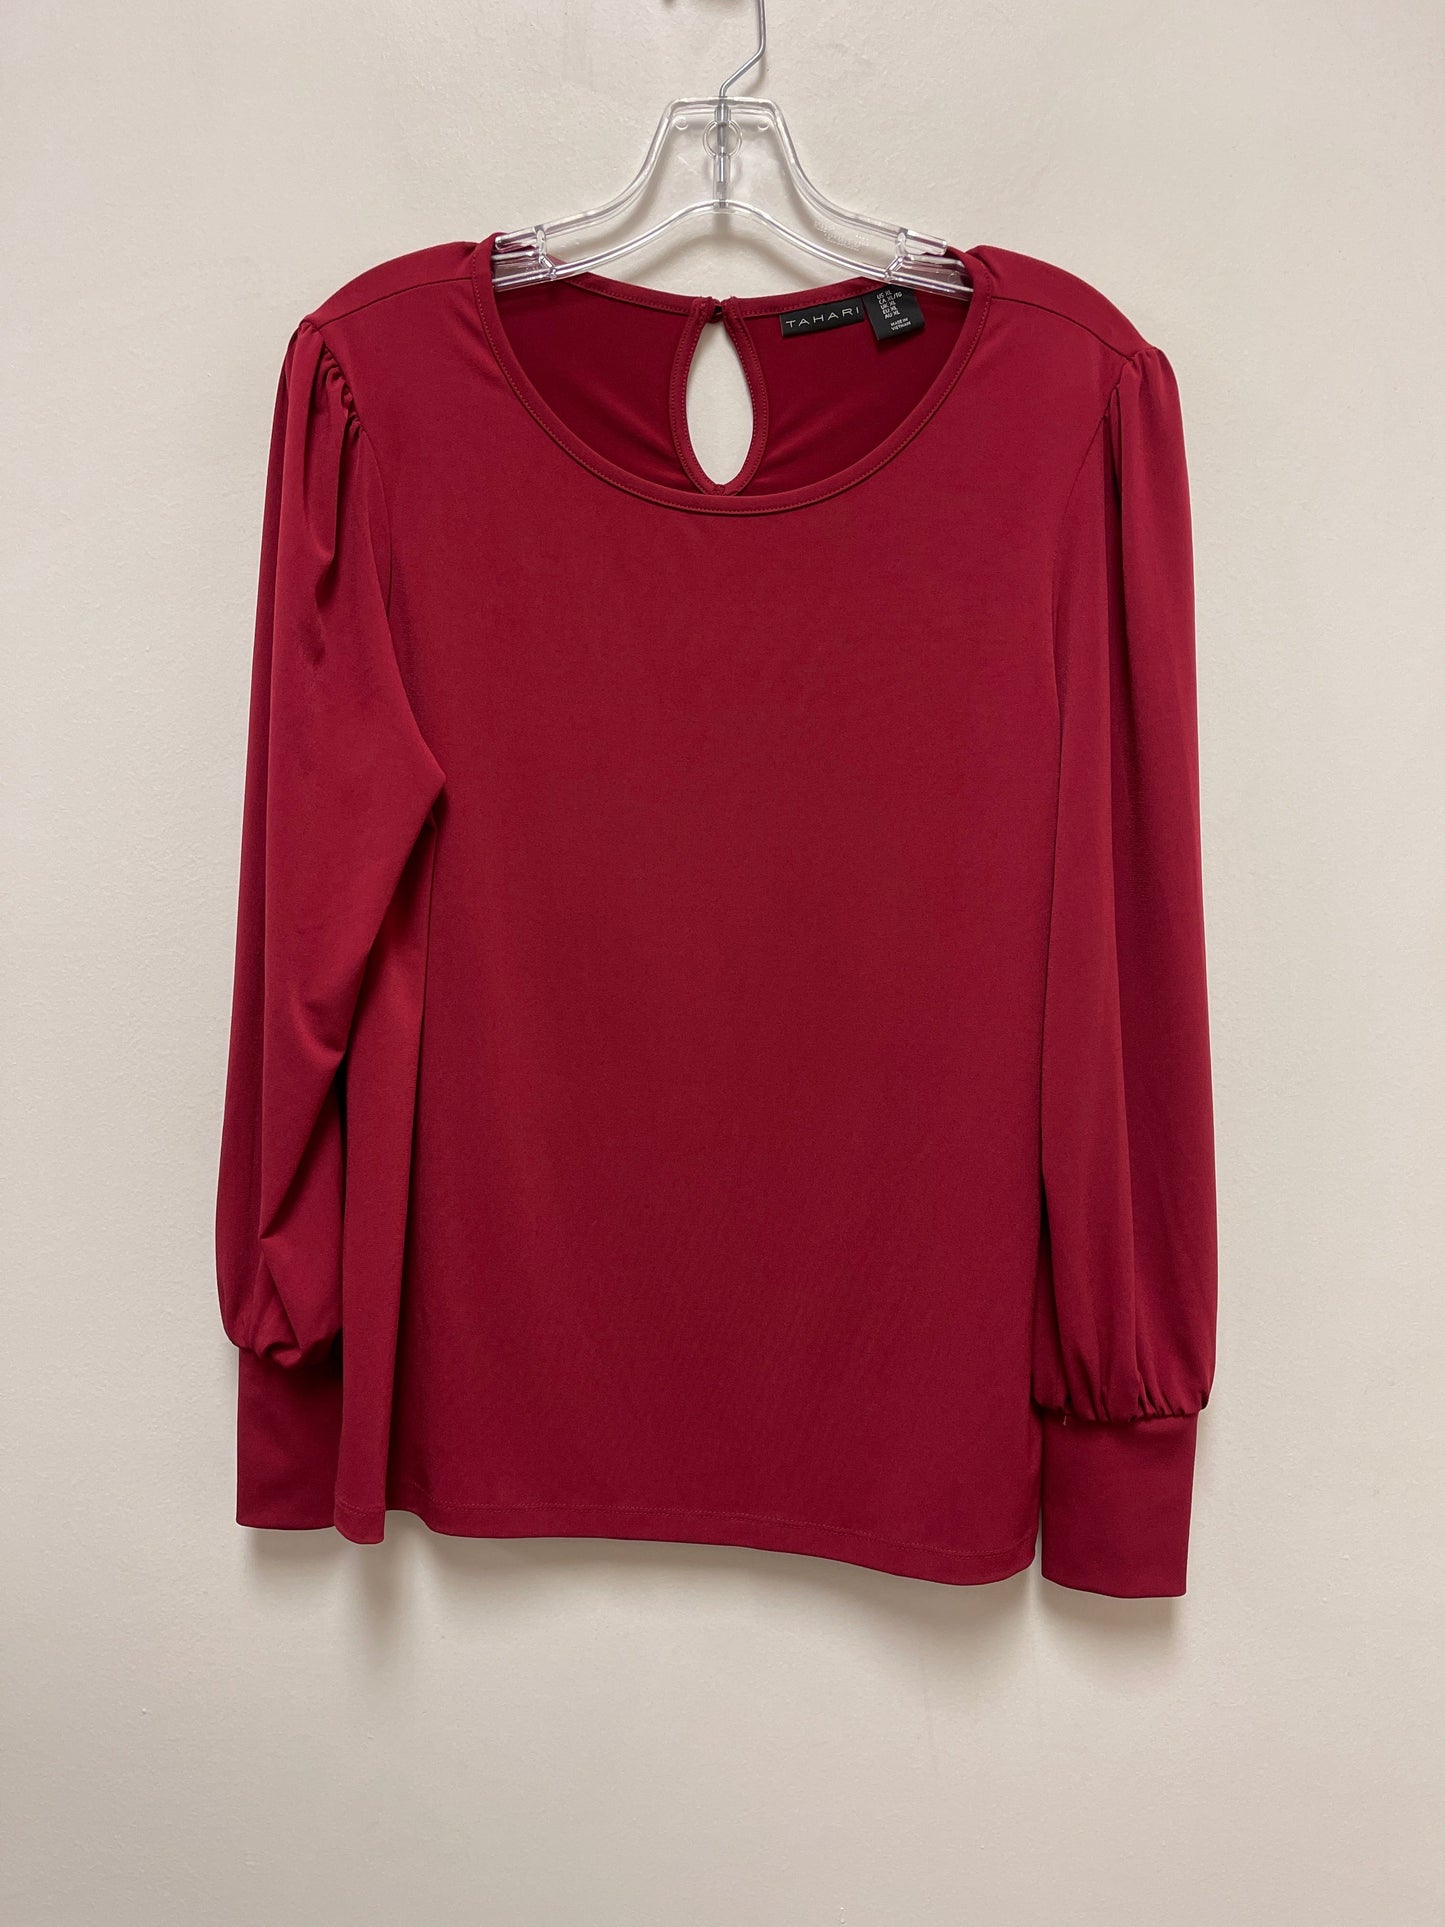 Red Top Long Sleeve Tahari By Arthur Levine, Size Xl